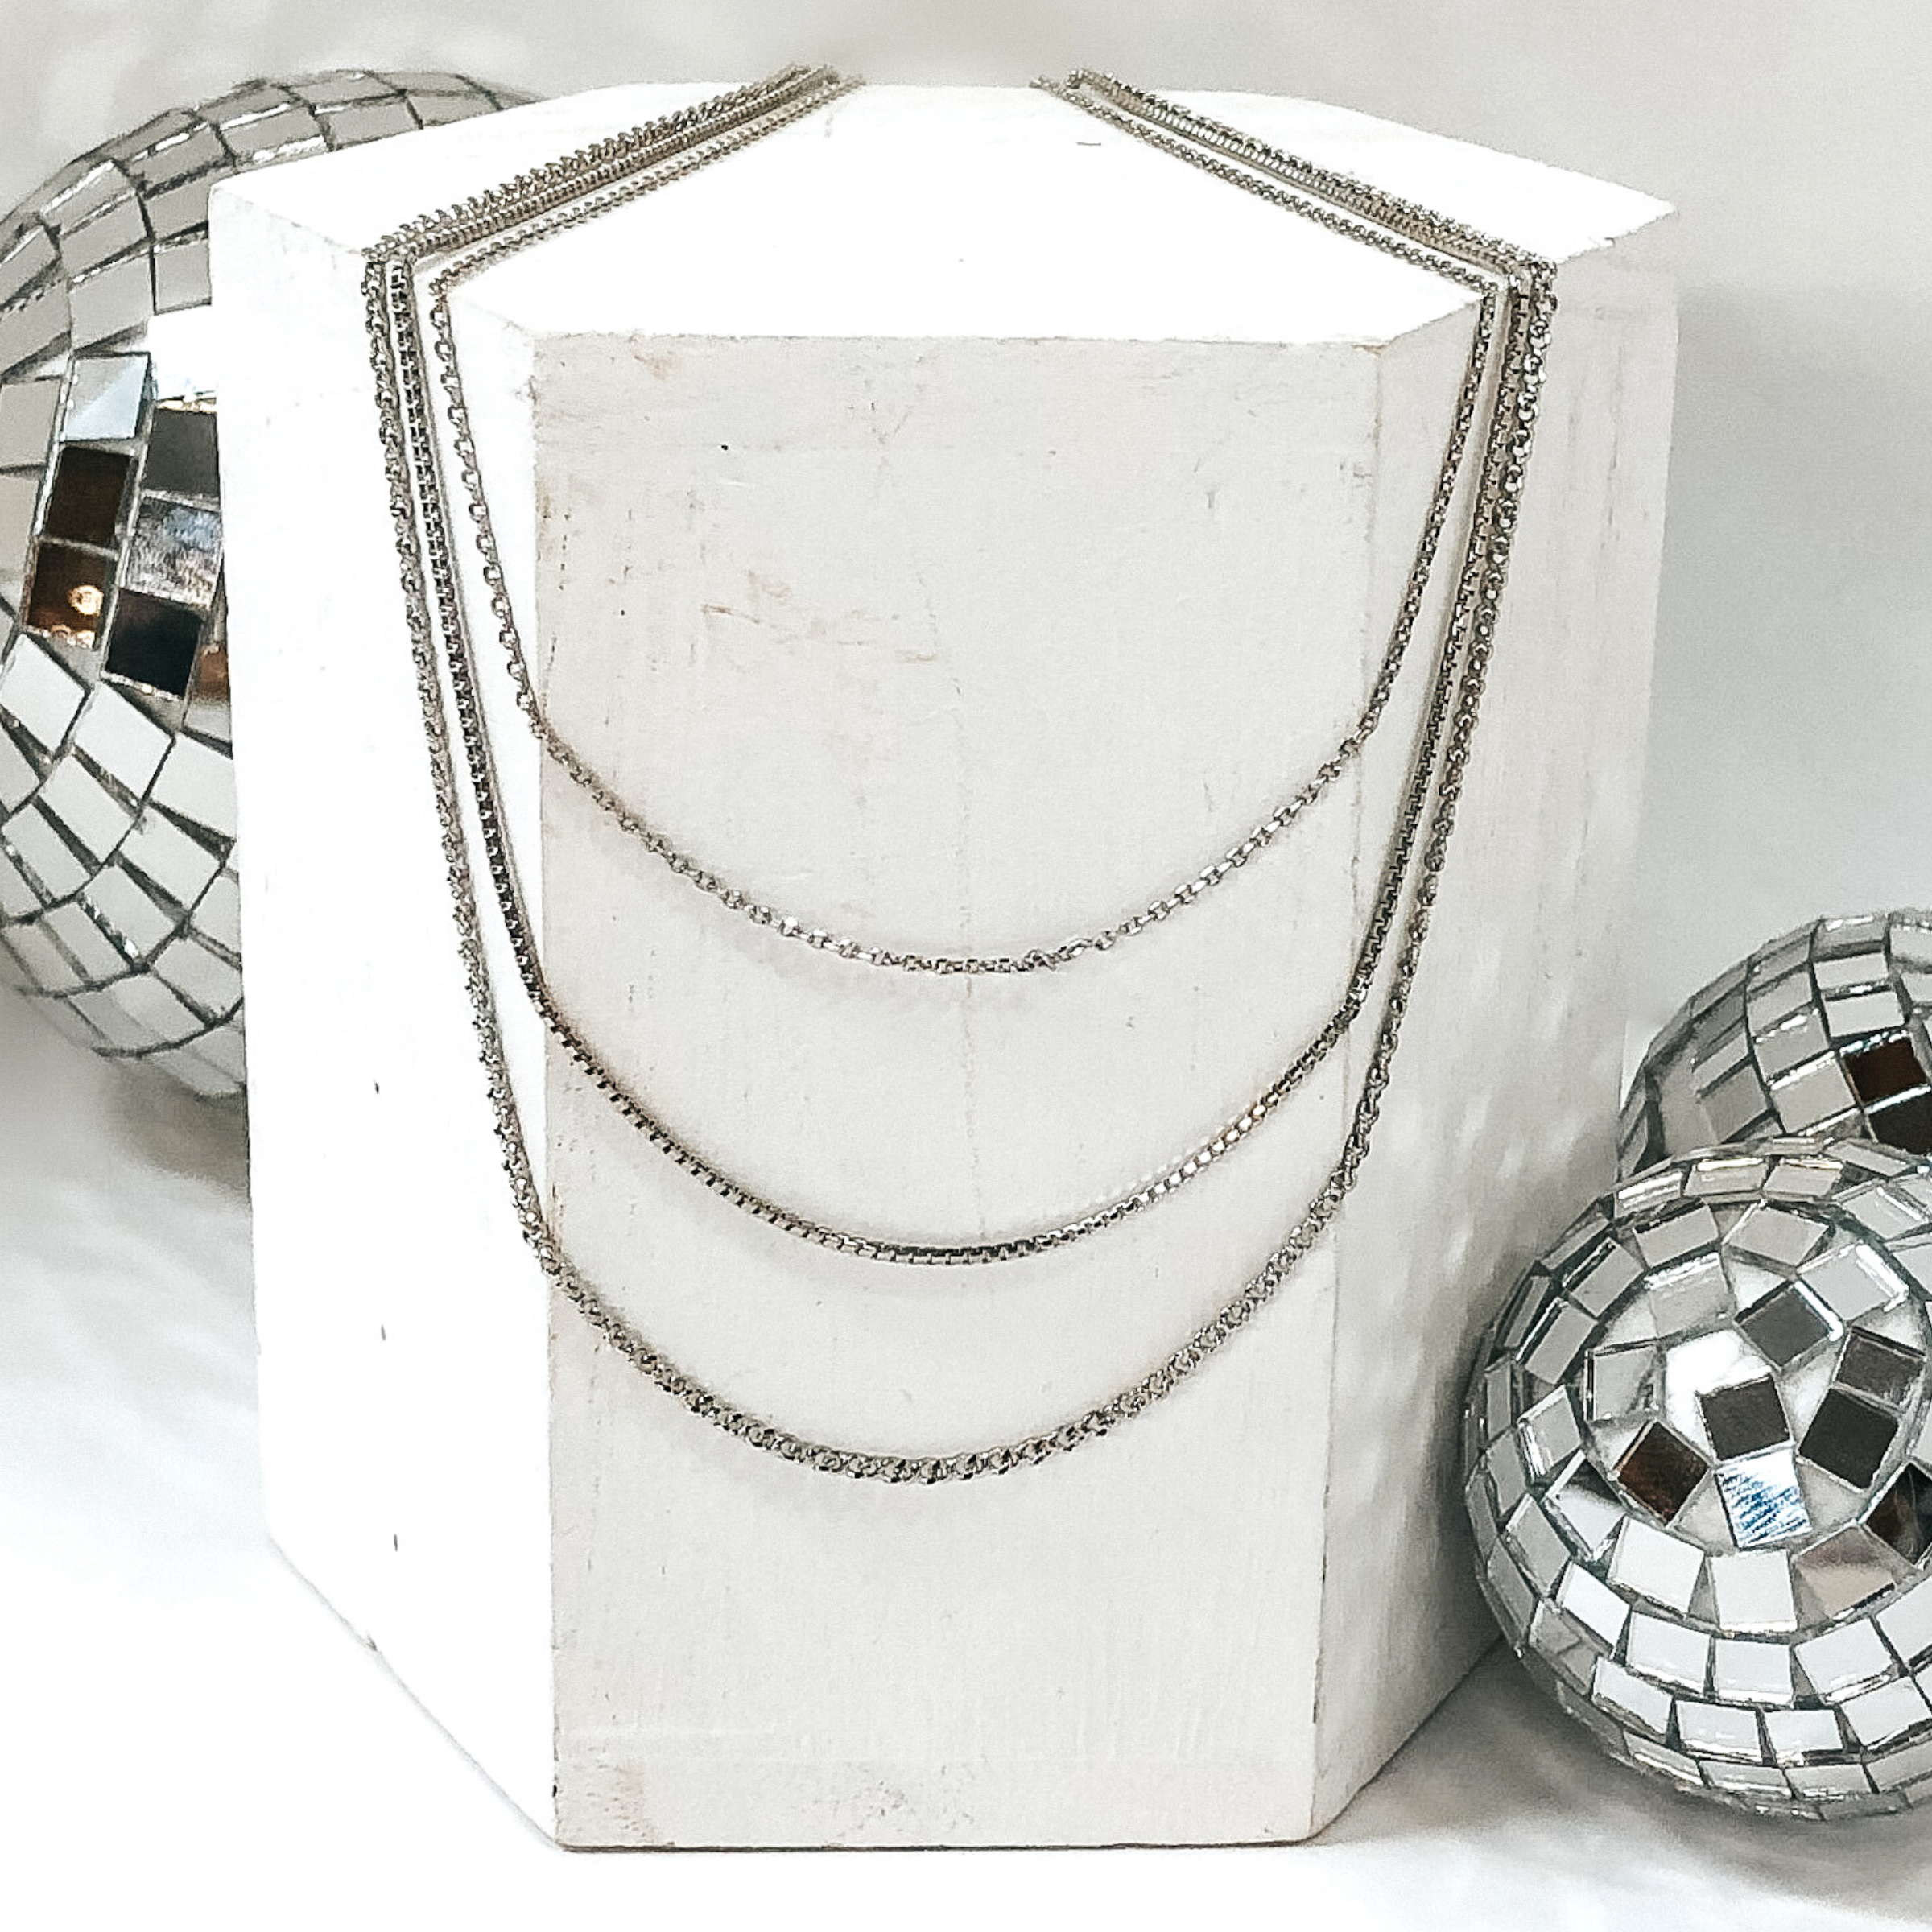 3 piece multi chained necklaces in silver